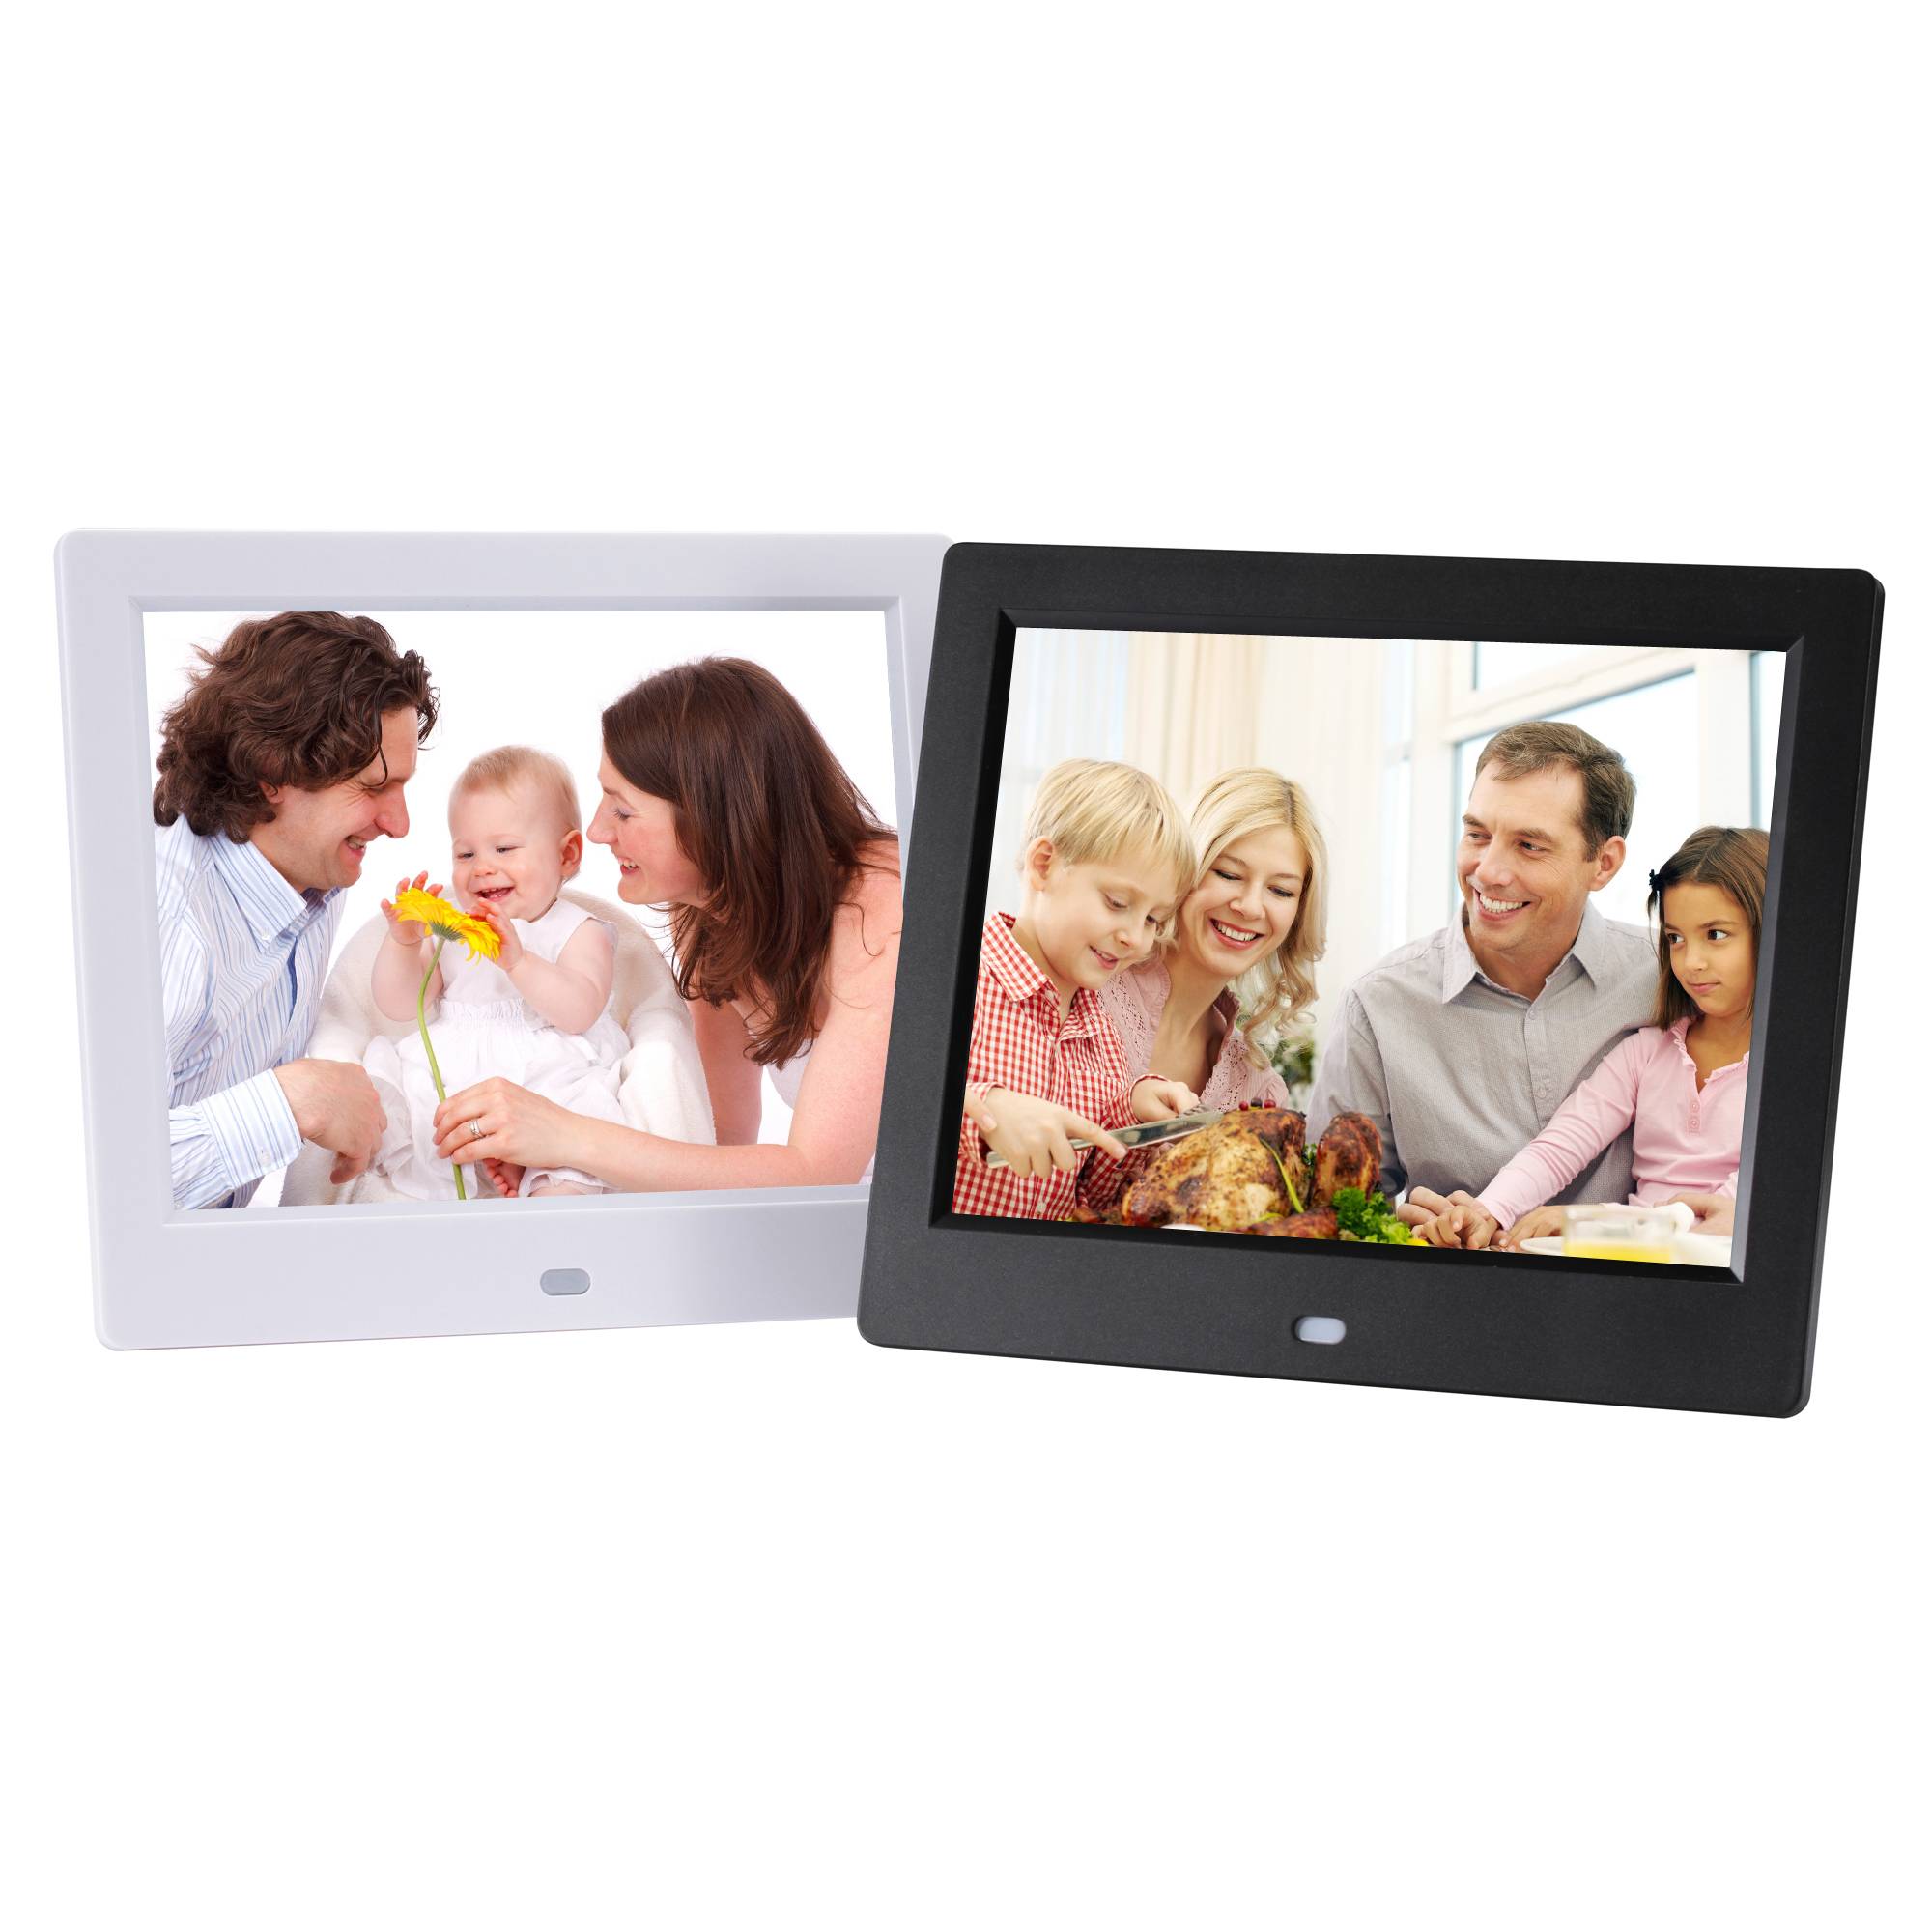 High definition Digital Photo Display - 8 inch slideshow cheap video player digital picture frame digital photo frame commercial advertising HD support 720P – Idealway